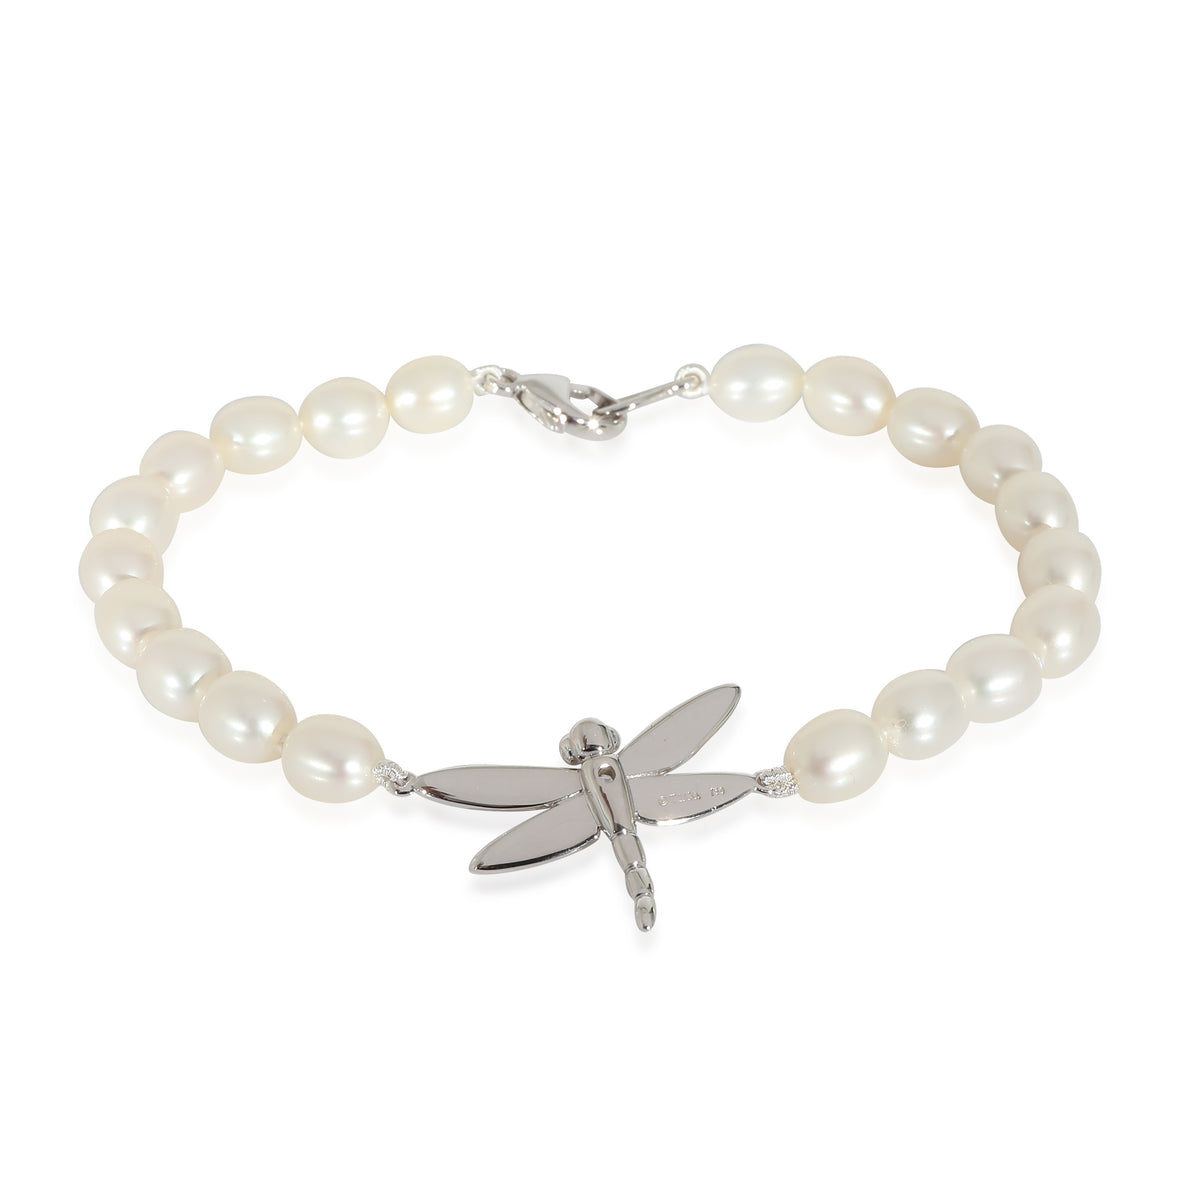 Tiffany & Co. Freshwater Pearl Bracelet With Dragonfly Charm in 18K White Gold